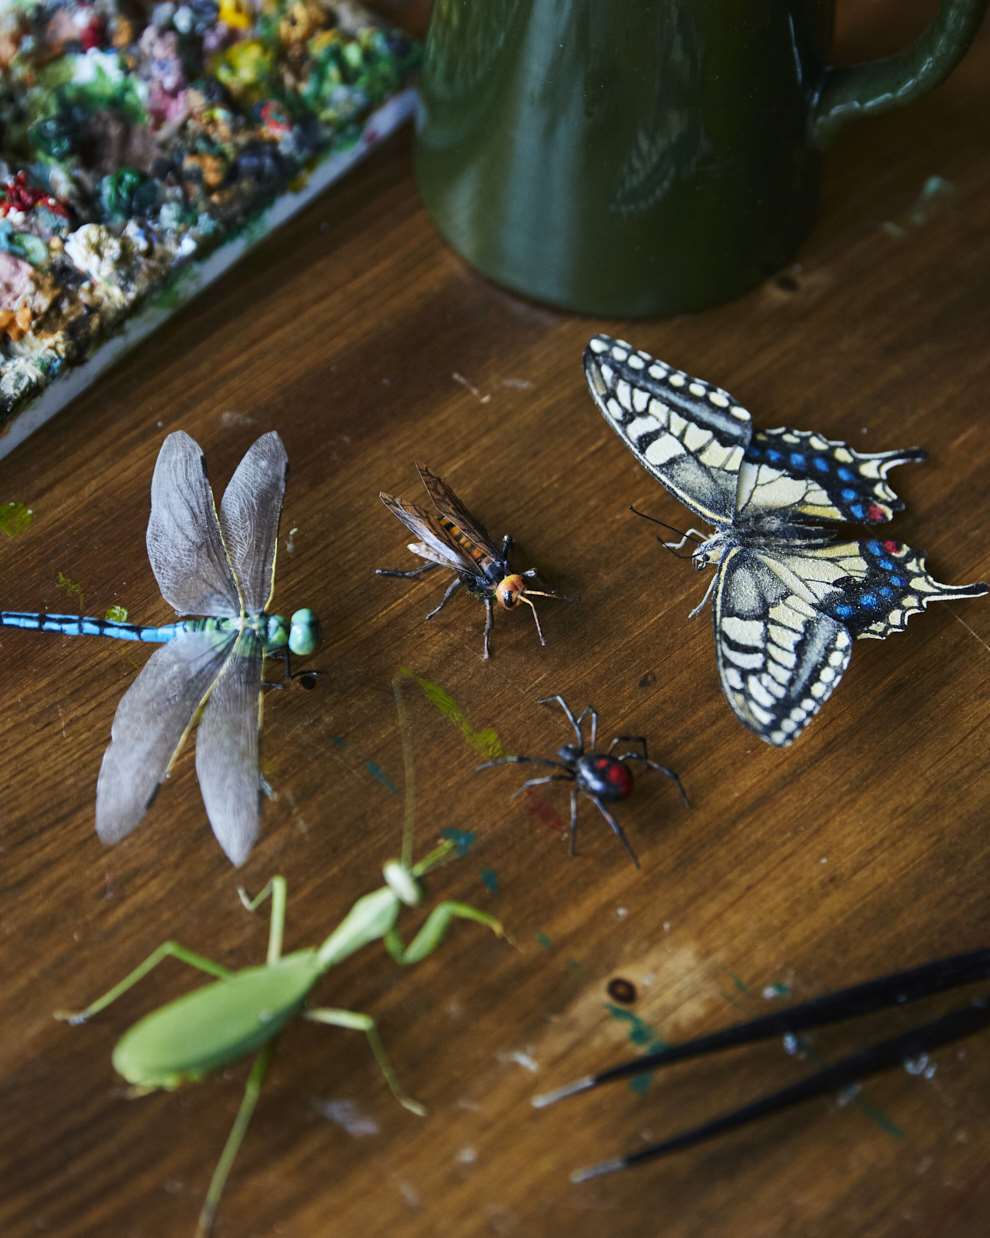 Hannah Lemon, Miniature detailed sculpture of insects including a butterfly, dragonfly and grasshopper. Created from Air drying clay, paper, wood, paint, mixed media.  